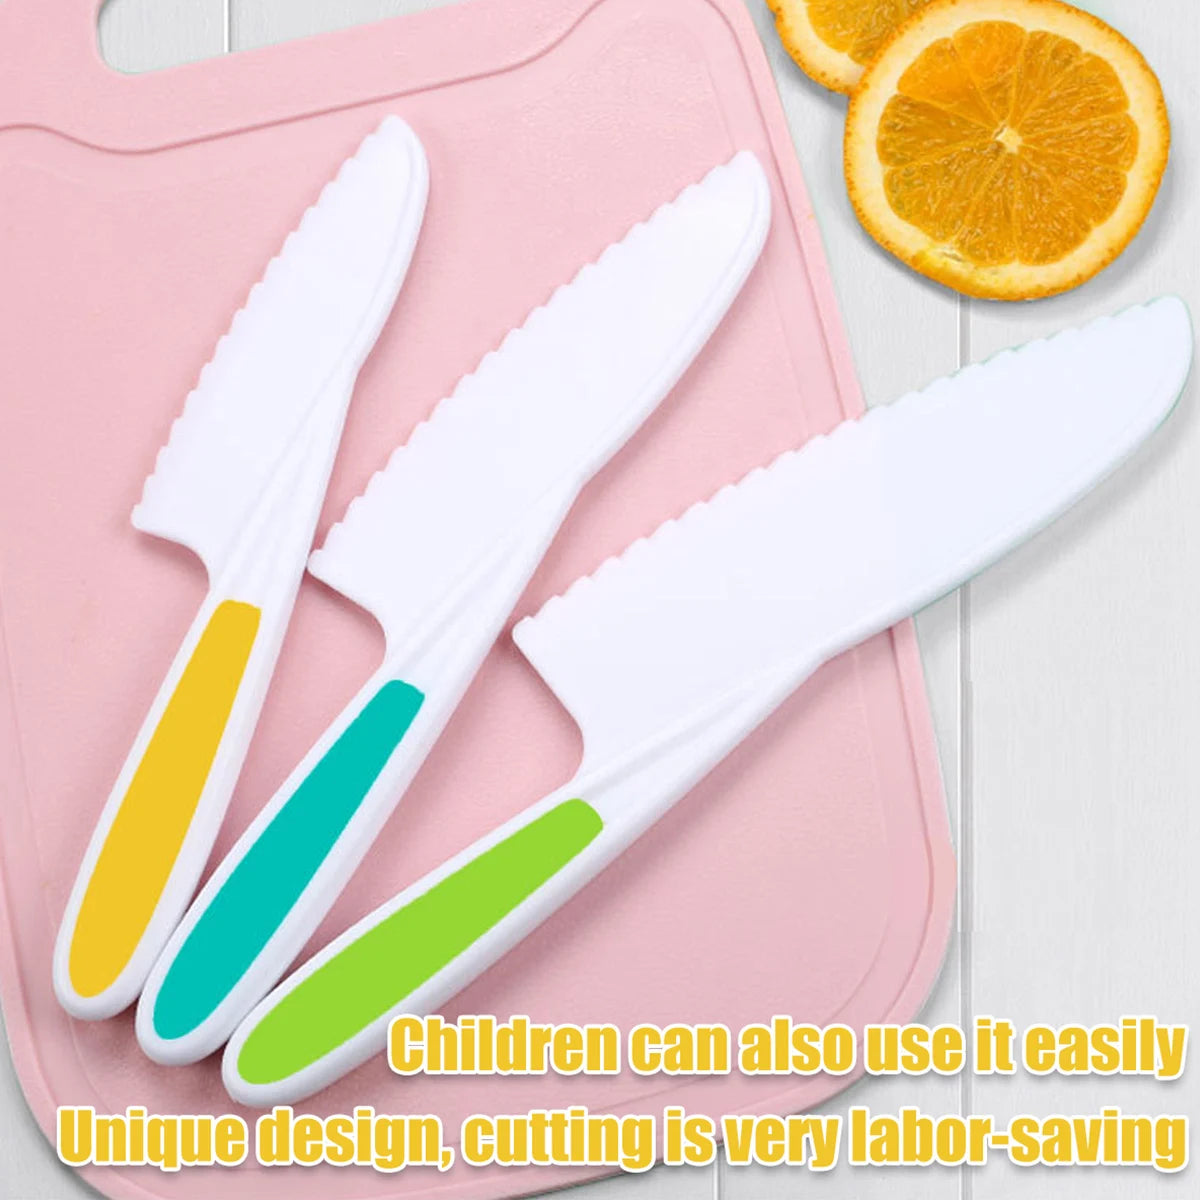 Chefinhos Kit: Set of Children's Cutters for Cooking